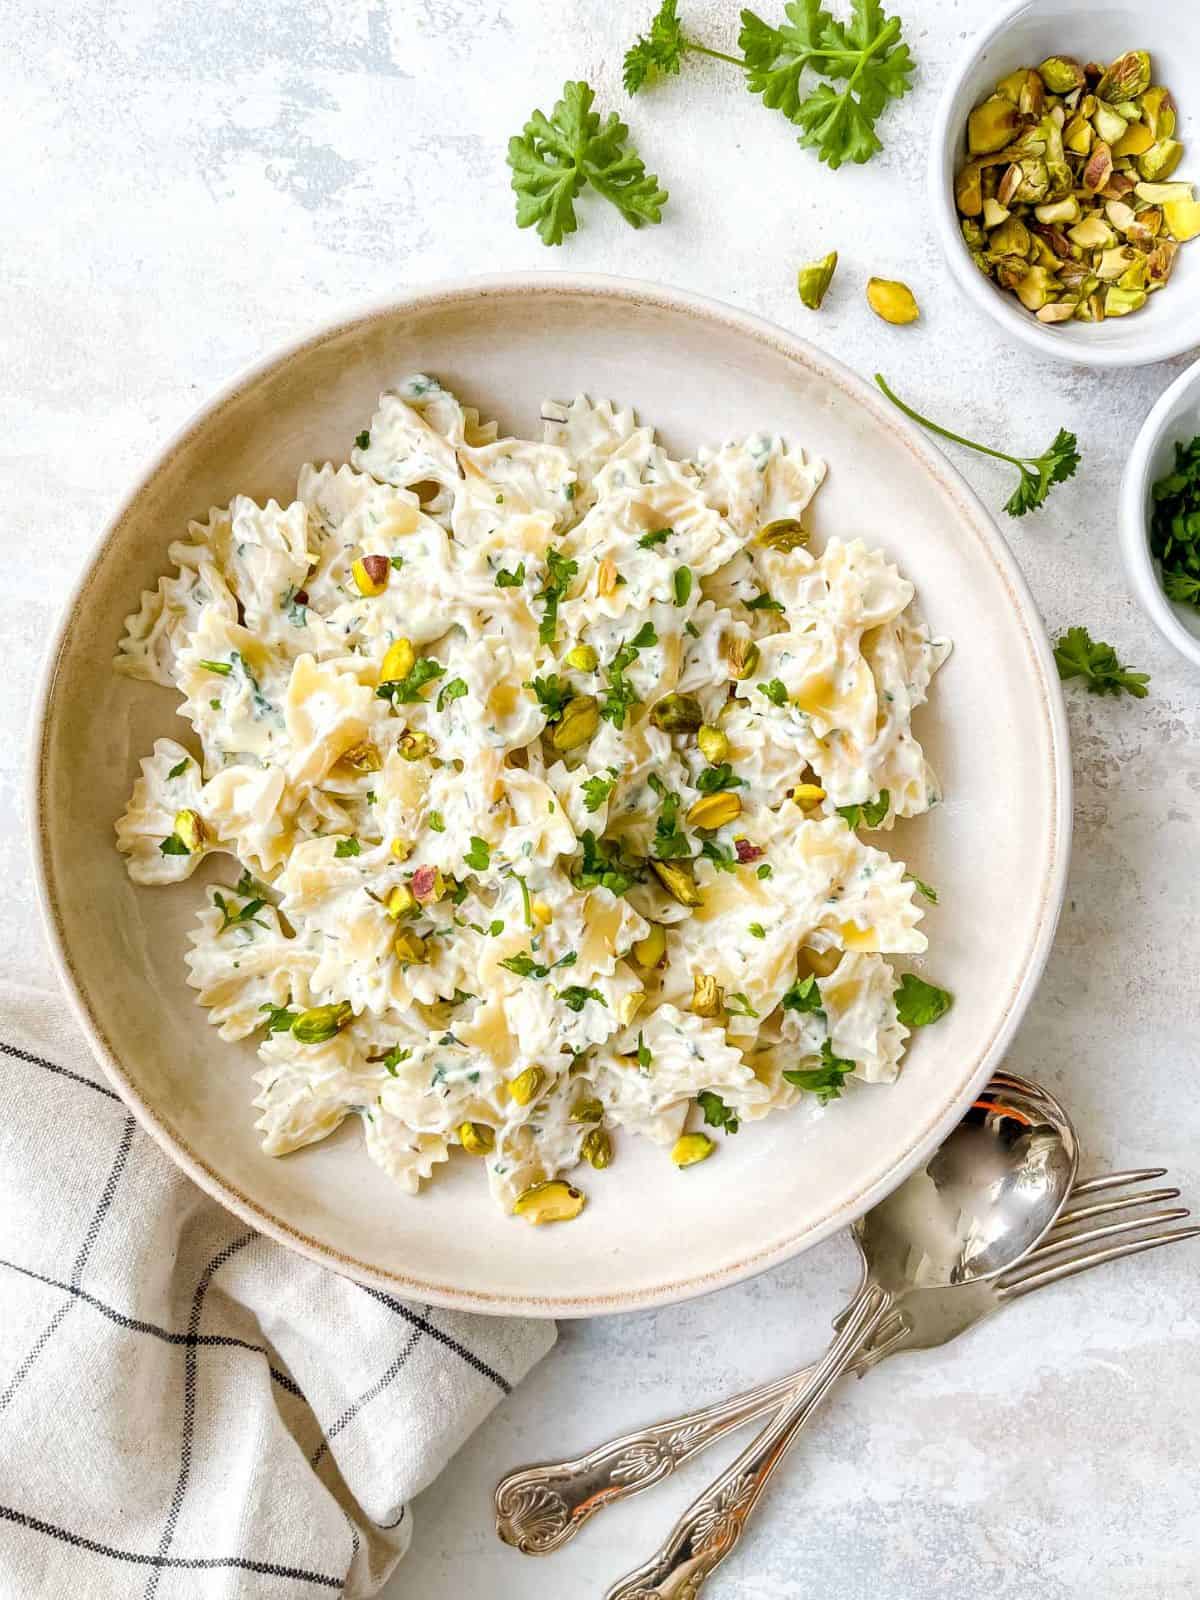 whipped ricotta pasta in a light brown bowl next to cutlery, herbs and bowl of pistachios.